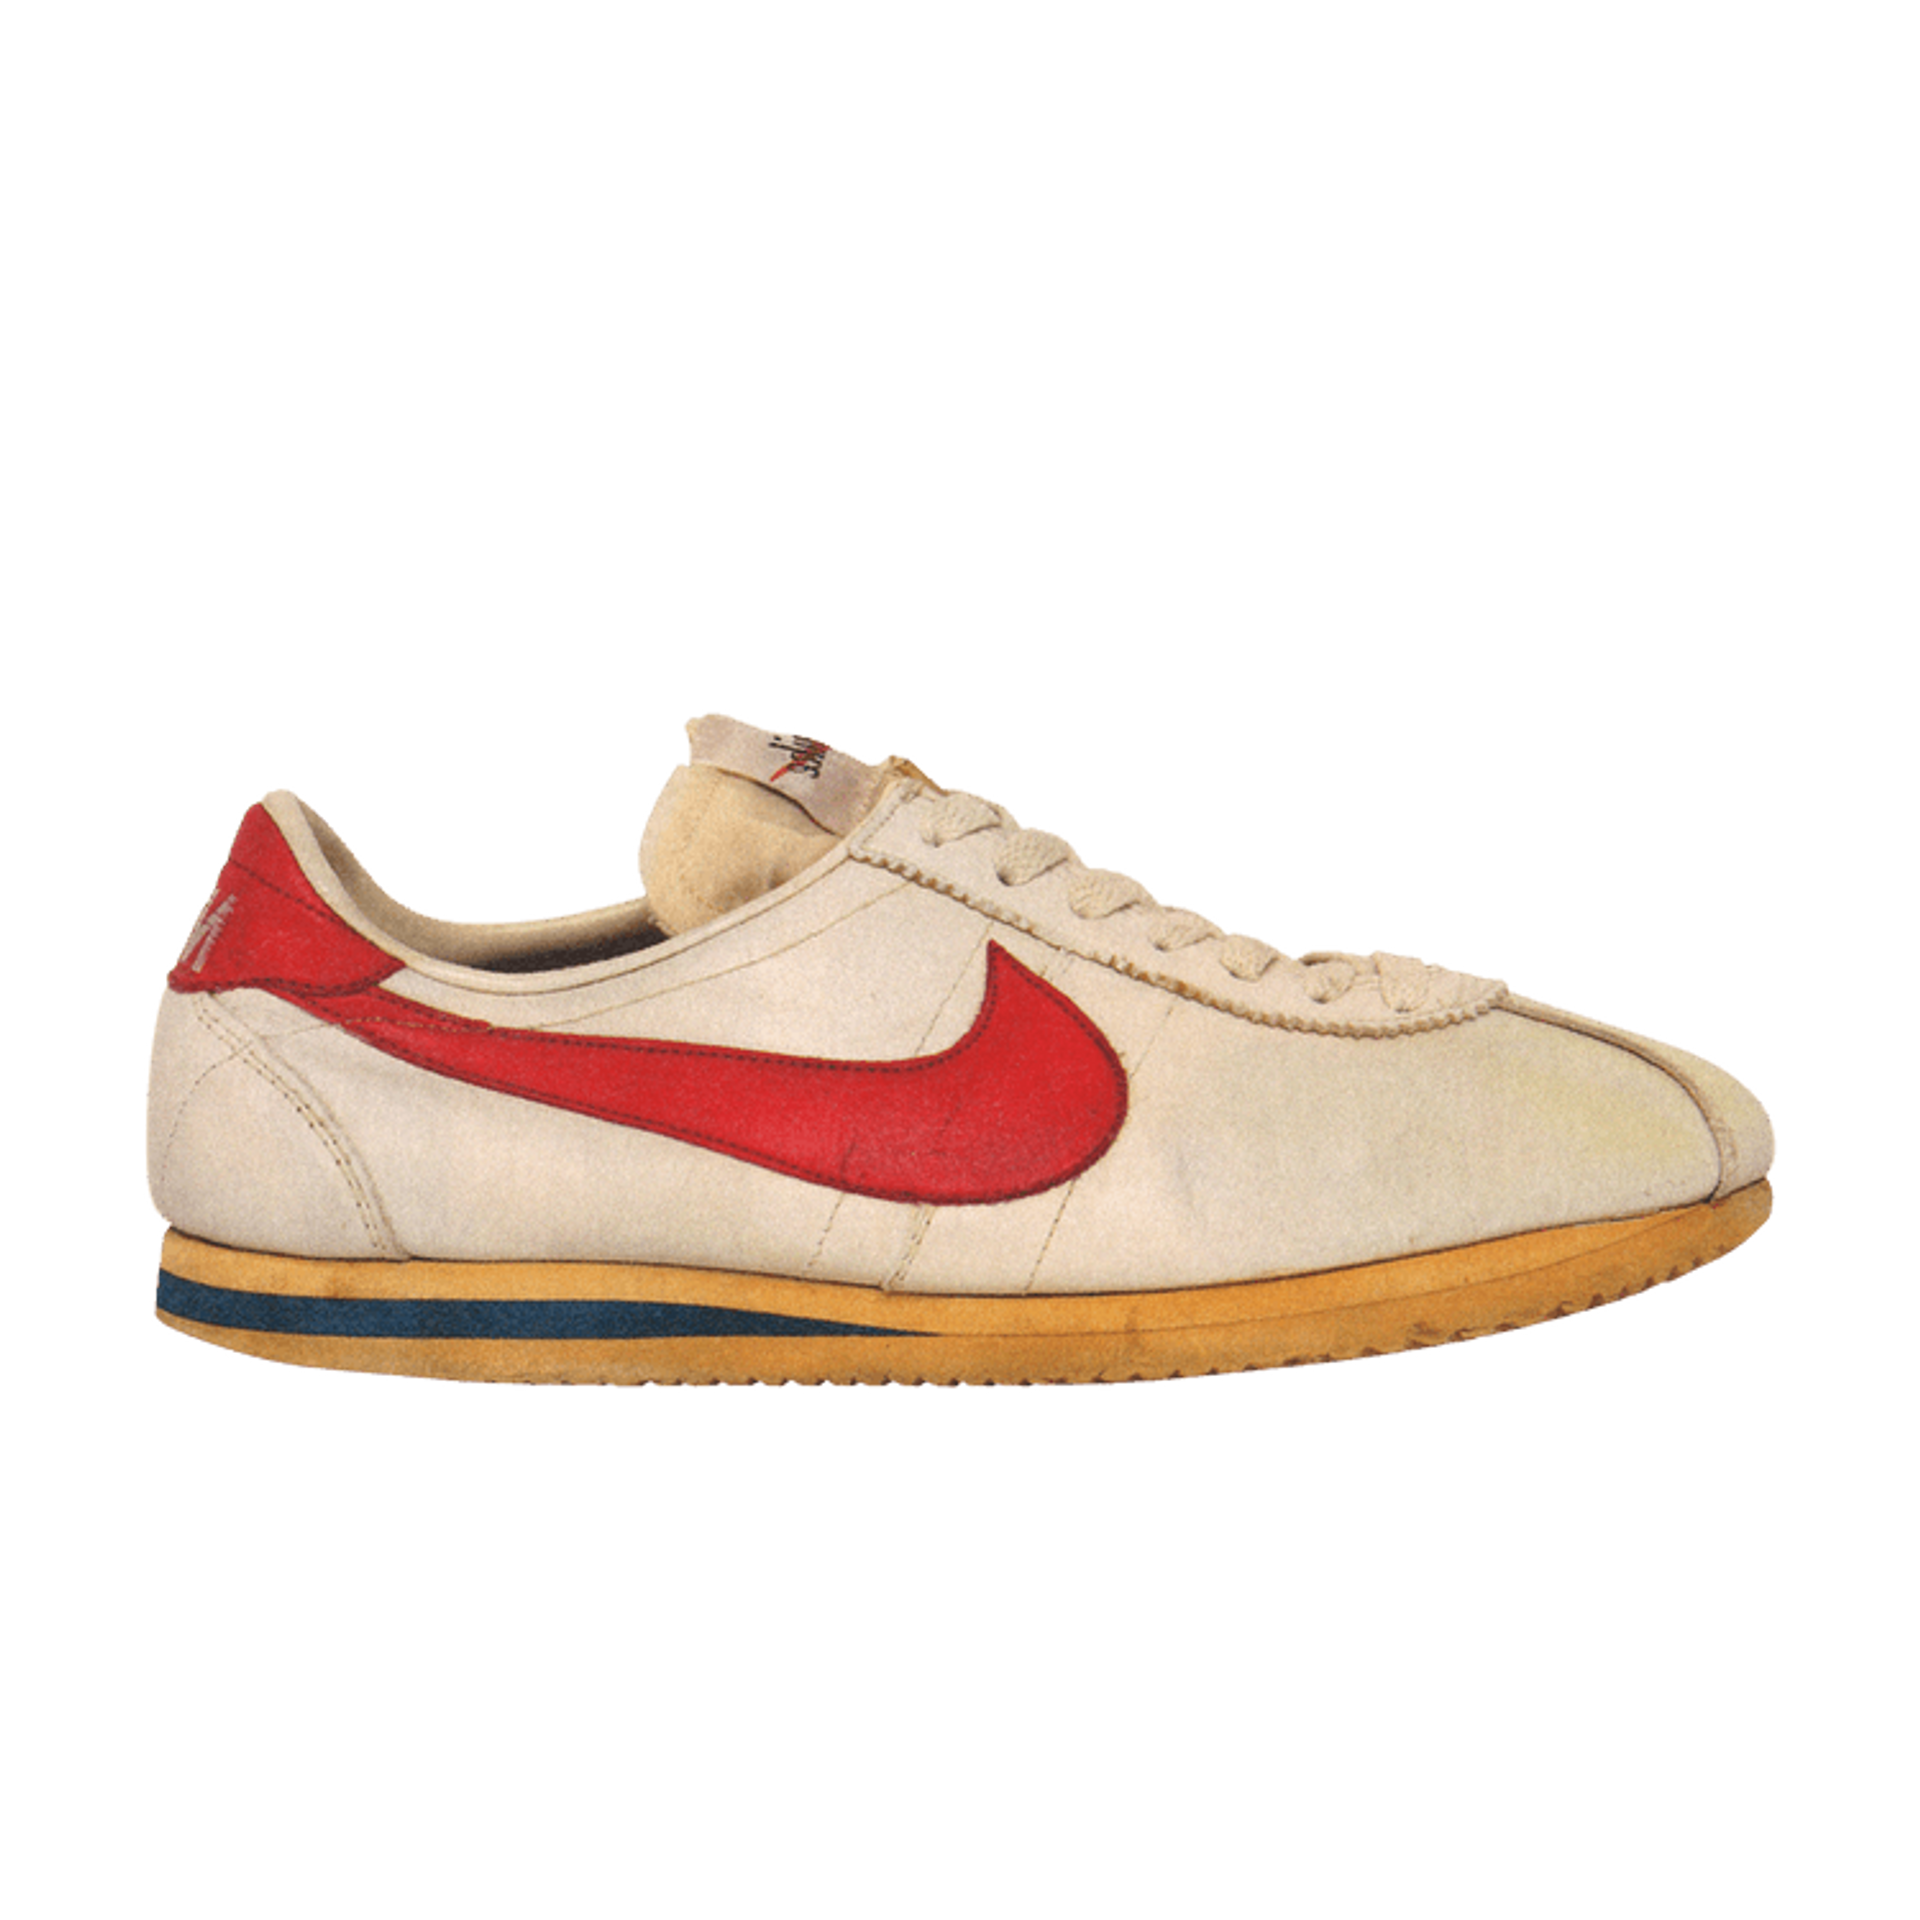 Cortez Leather Deluxe 'White Red' 1974